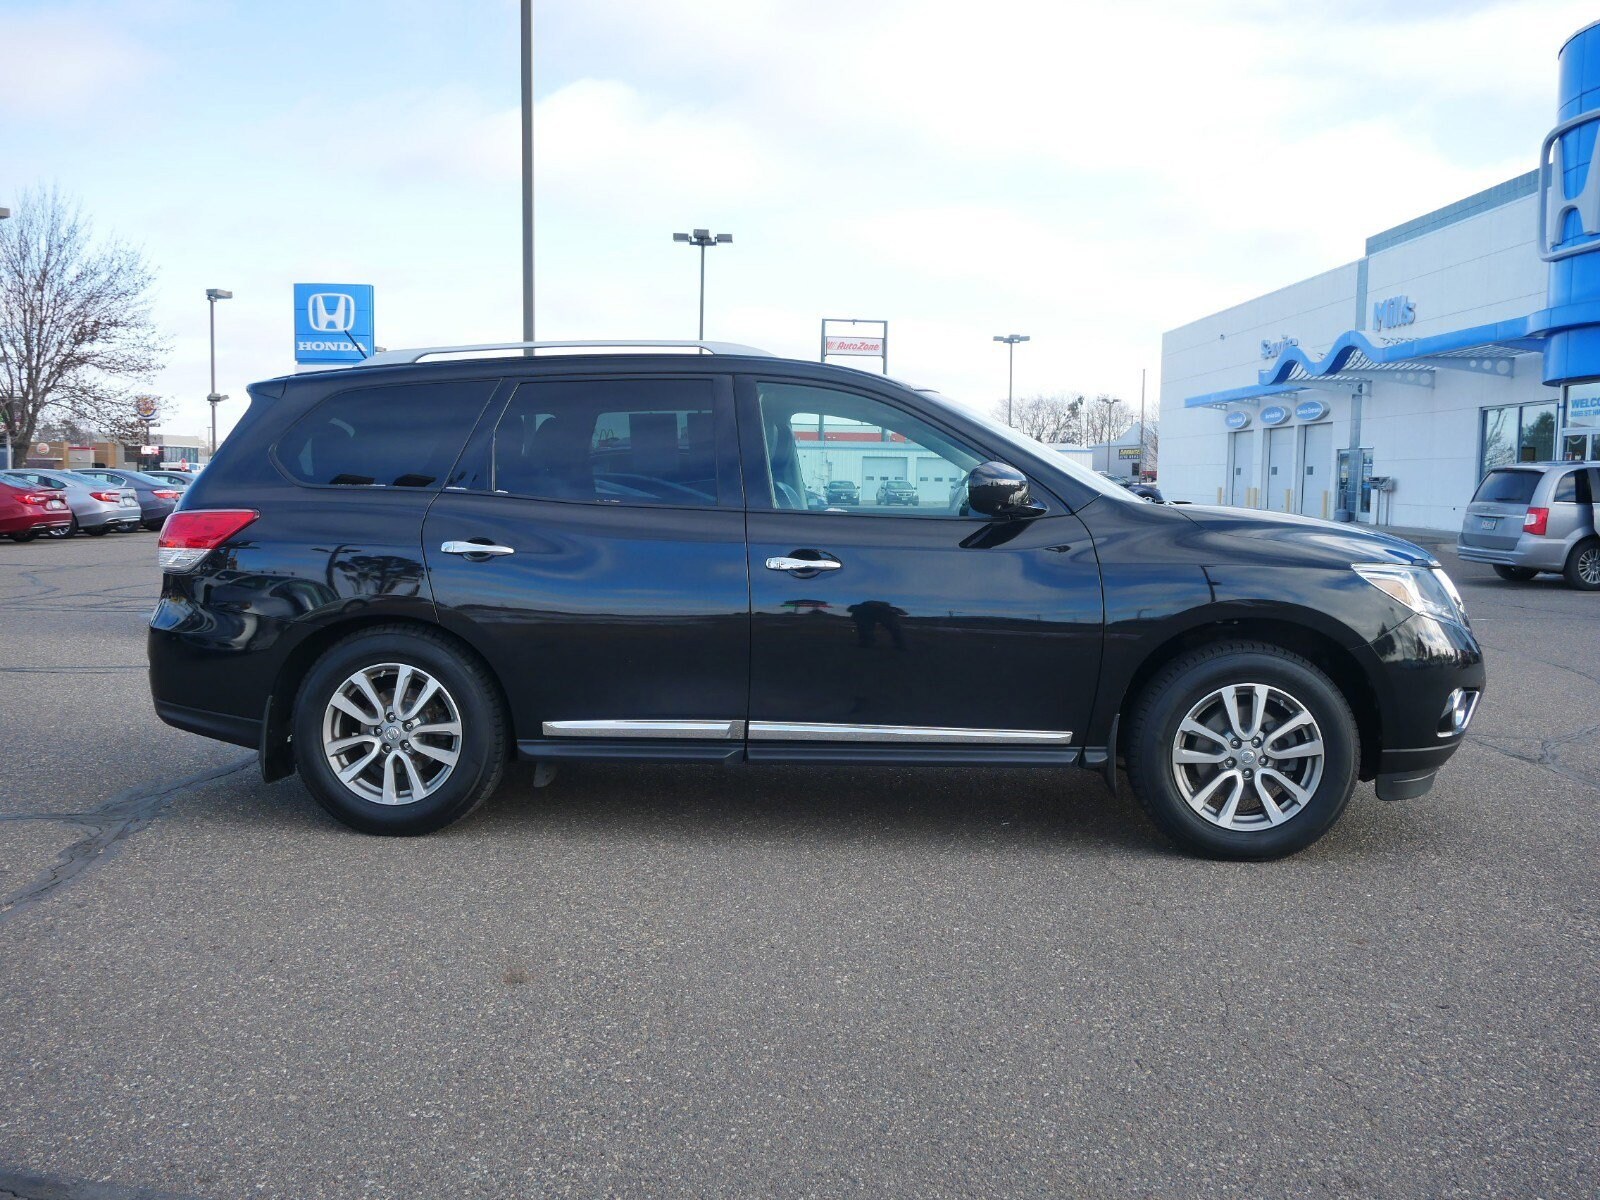 Used 2015 Nissan Pathfinder SL with VIN 5N1AR2MM6FC701454 for sale in Baxter, Minnesota